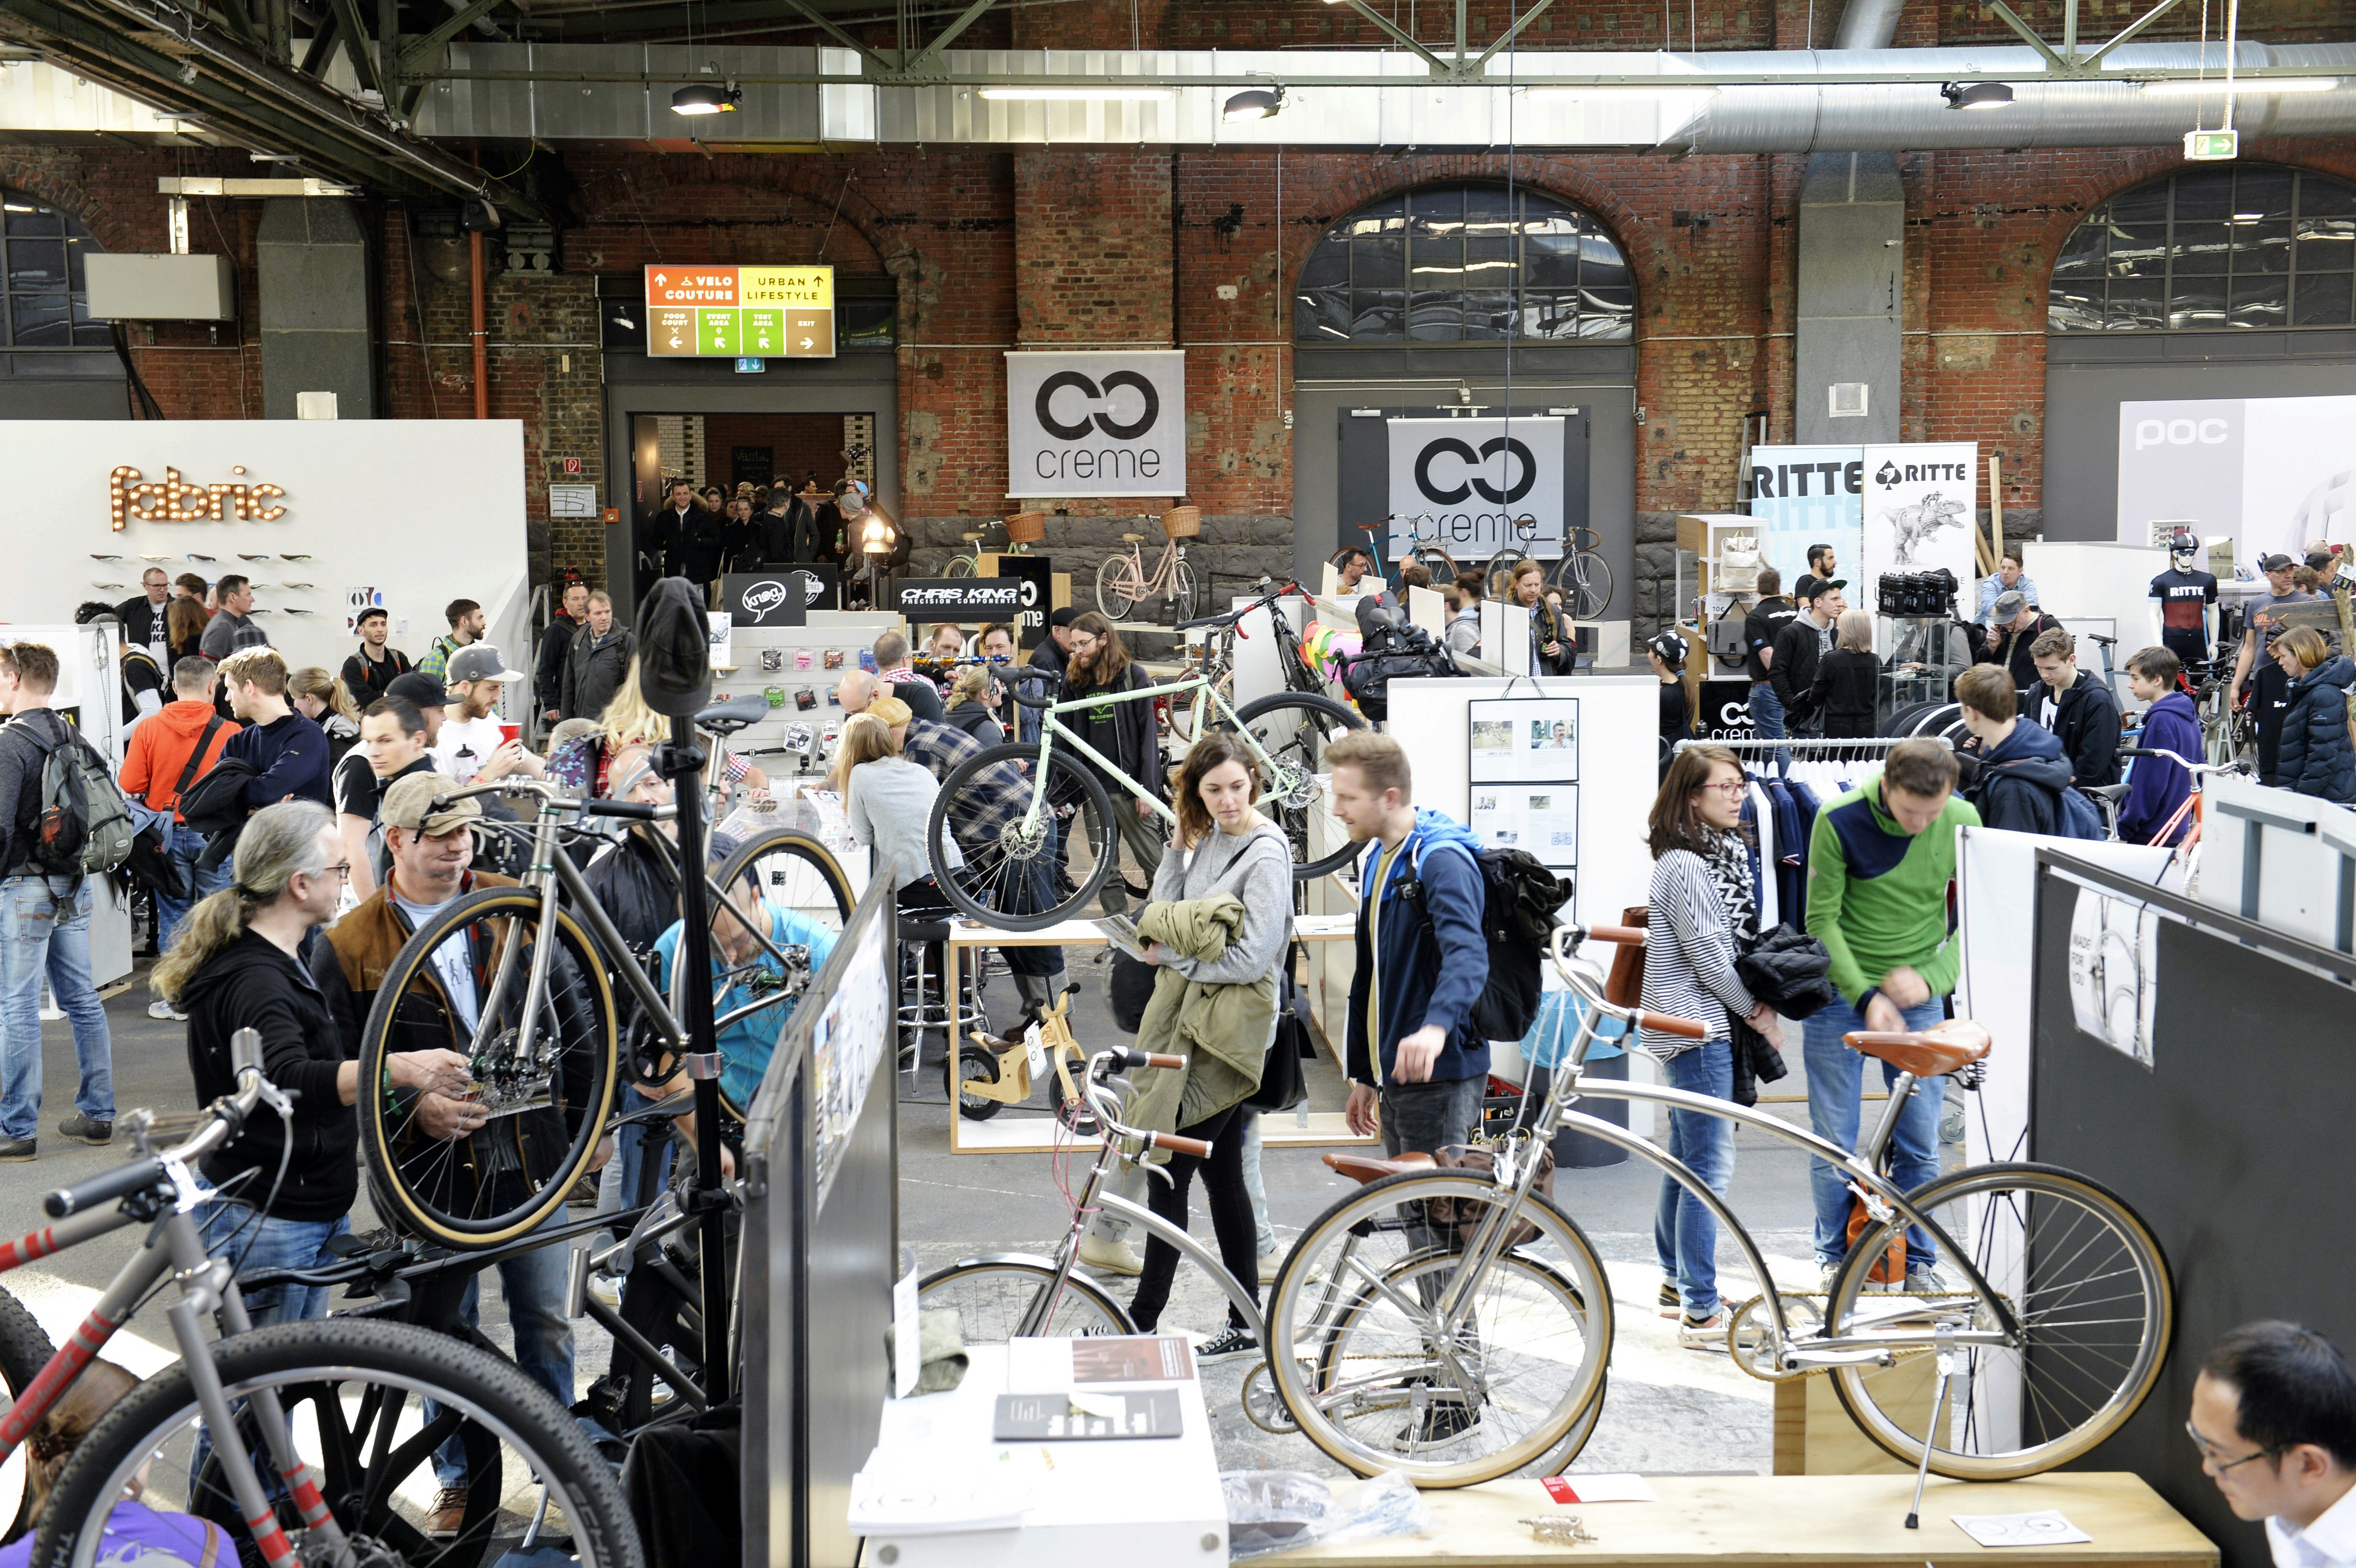 The Vienna Bicycle Show hopes to create the same bicycle vibe as its Berlin event. – Photo Berlin Bicycle Show